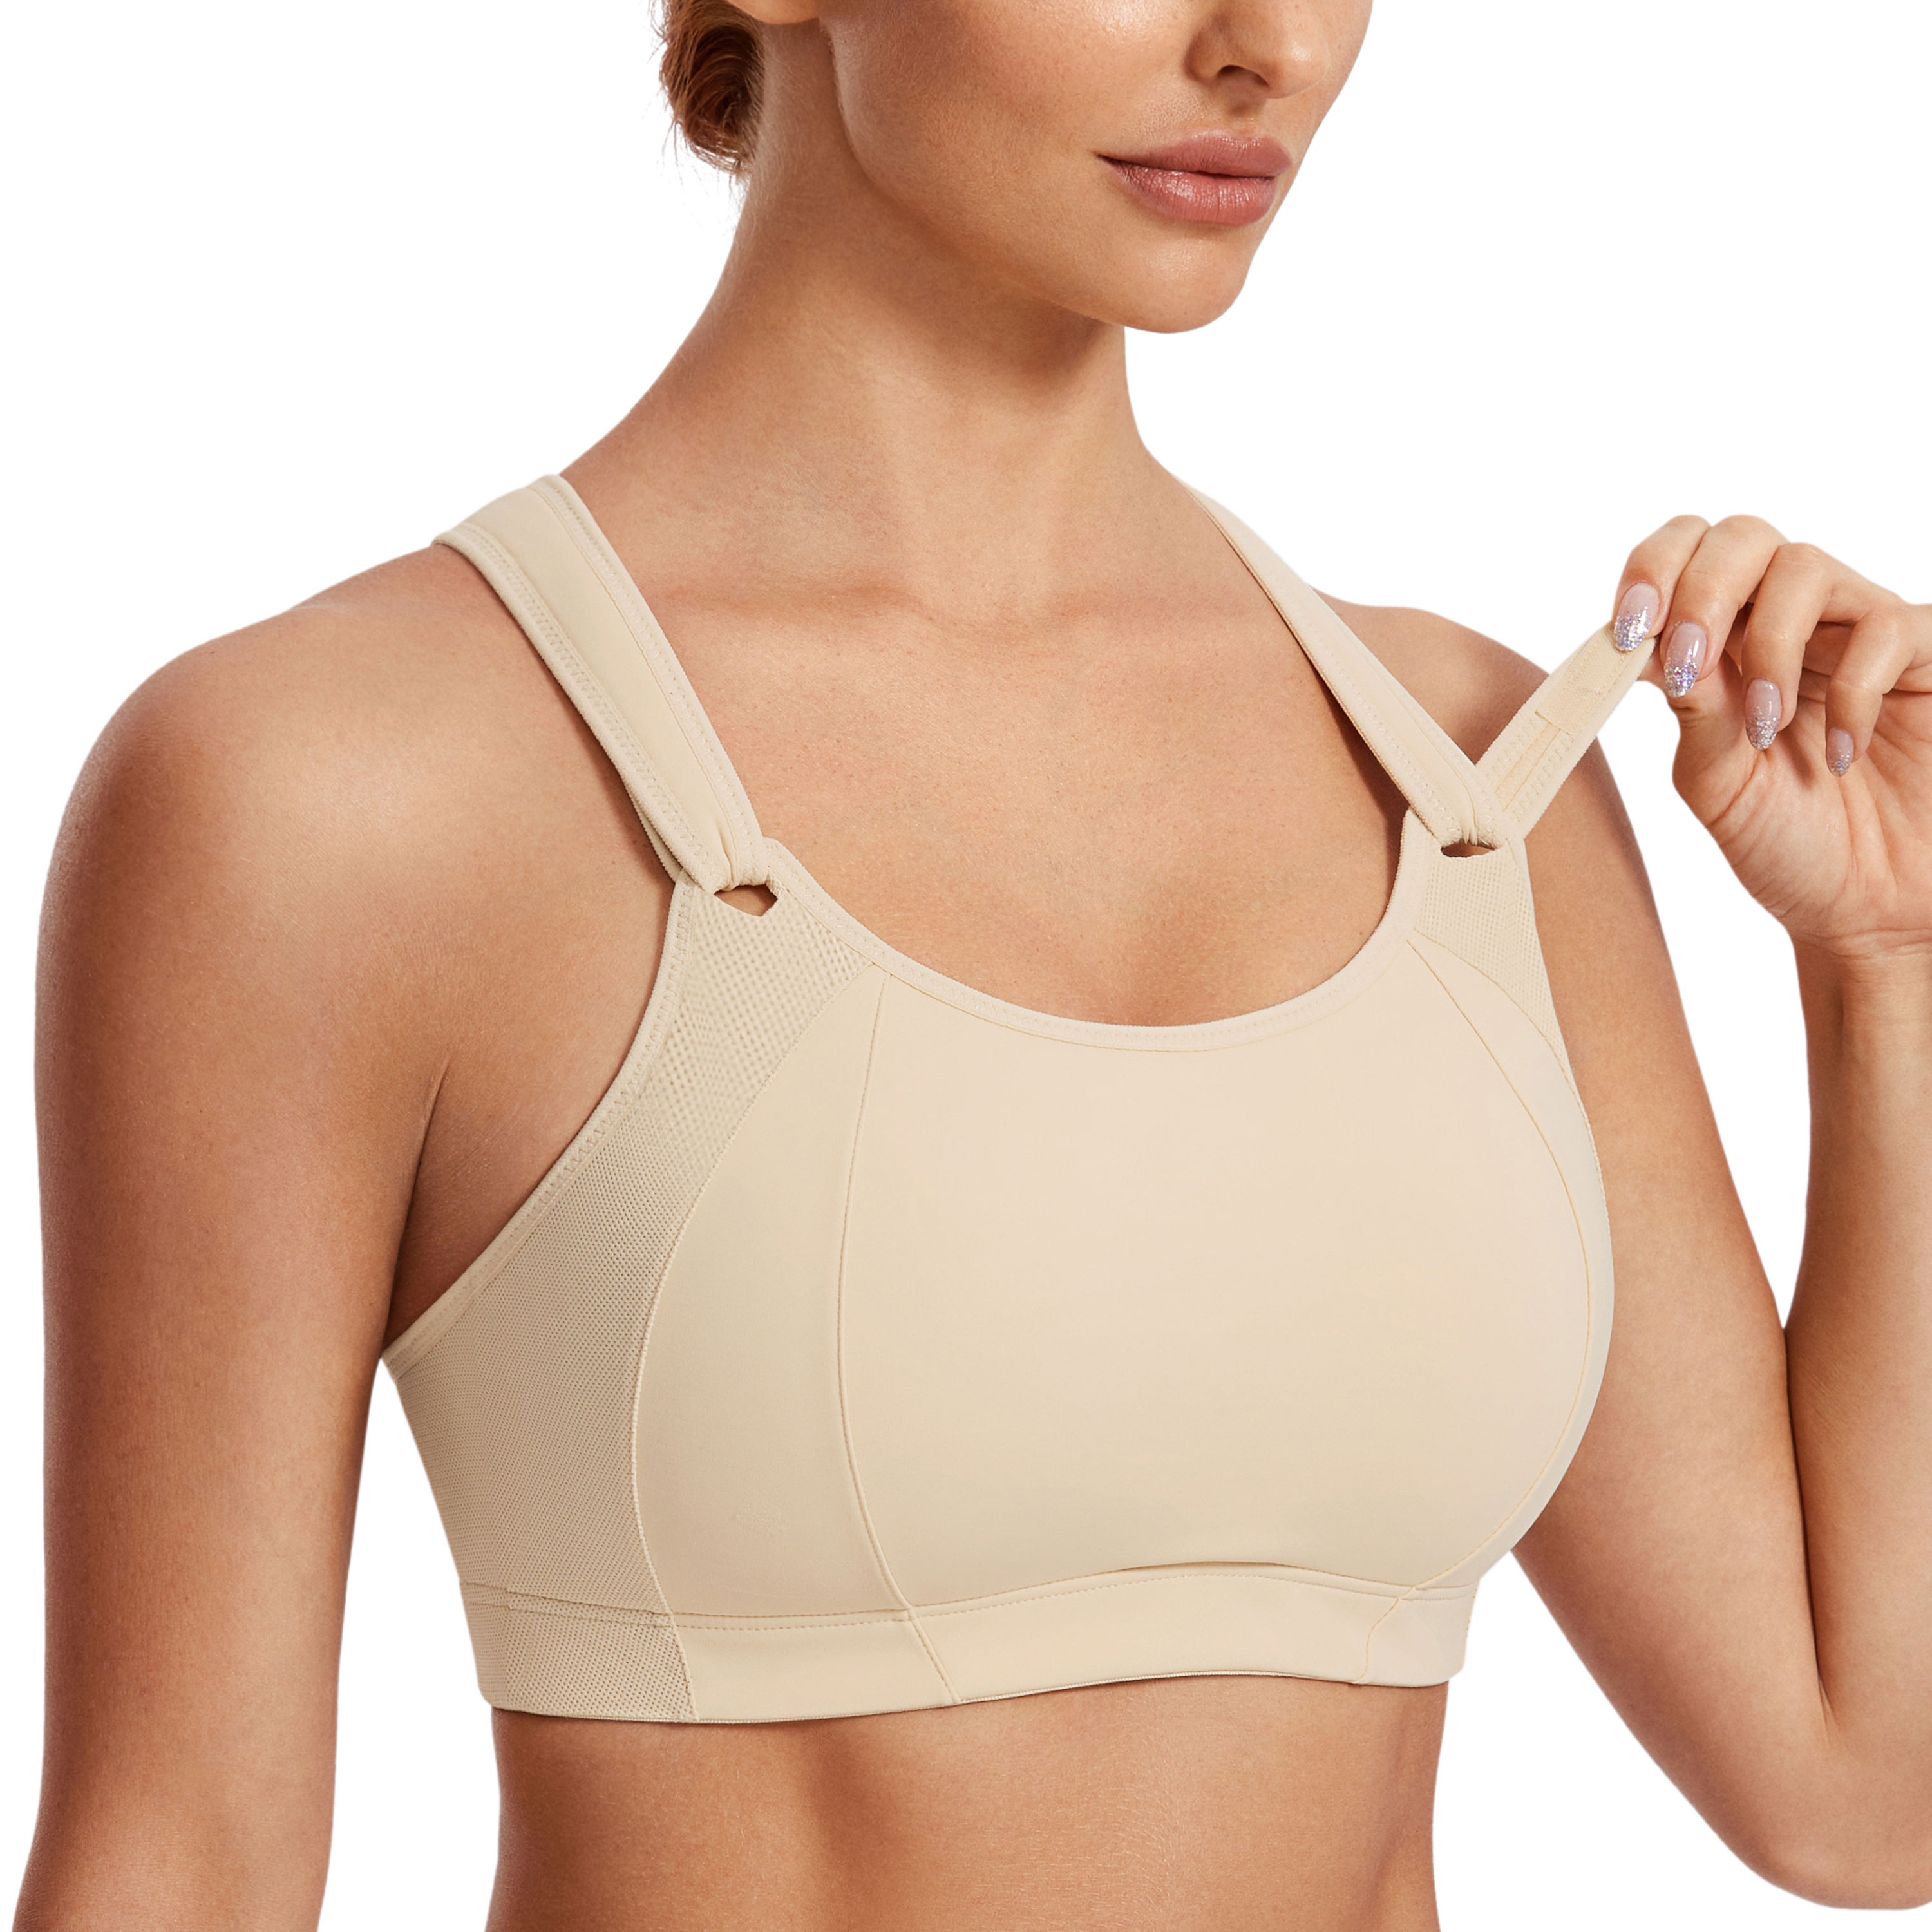 SYROKAN Women Sports Bra Wirefree Front Adjustable Padded Racerback Full  Support